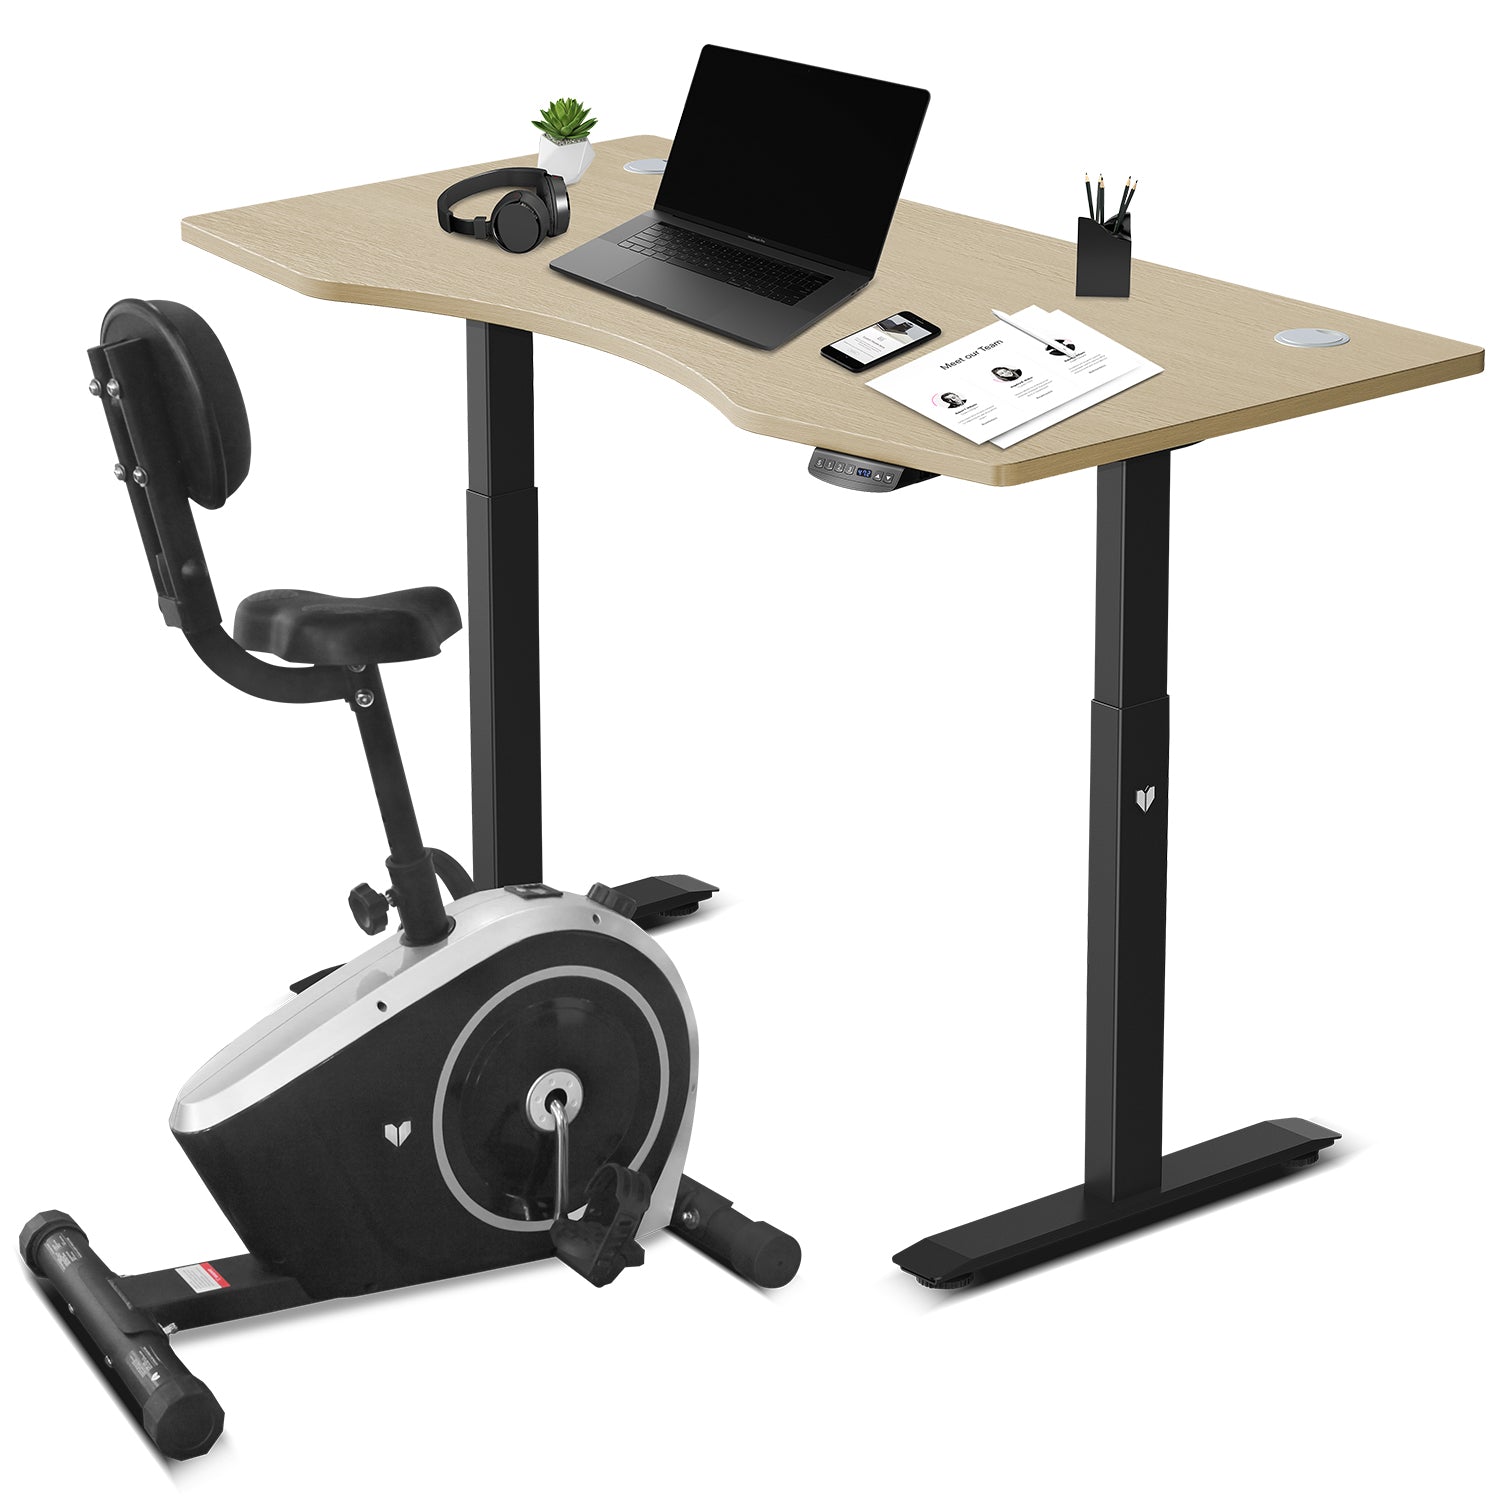 Lifespan Fitness Cyclestation 3 Exercise Bike with ErgoDesk Automatic Standing Desk 150cm in Oak/Black